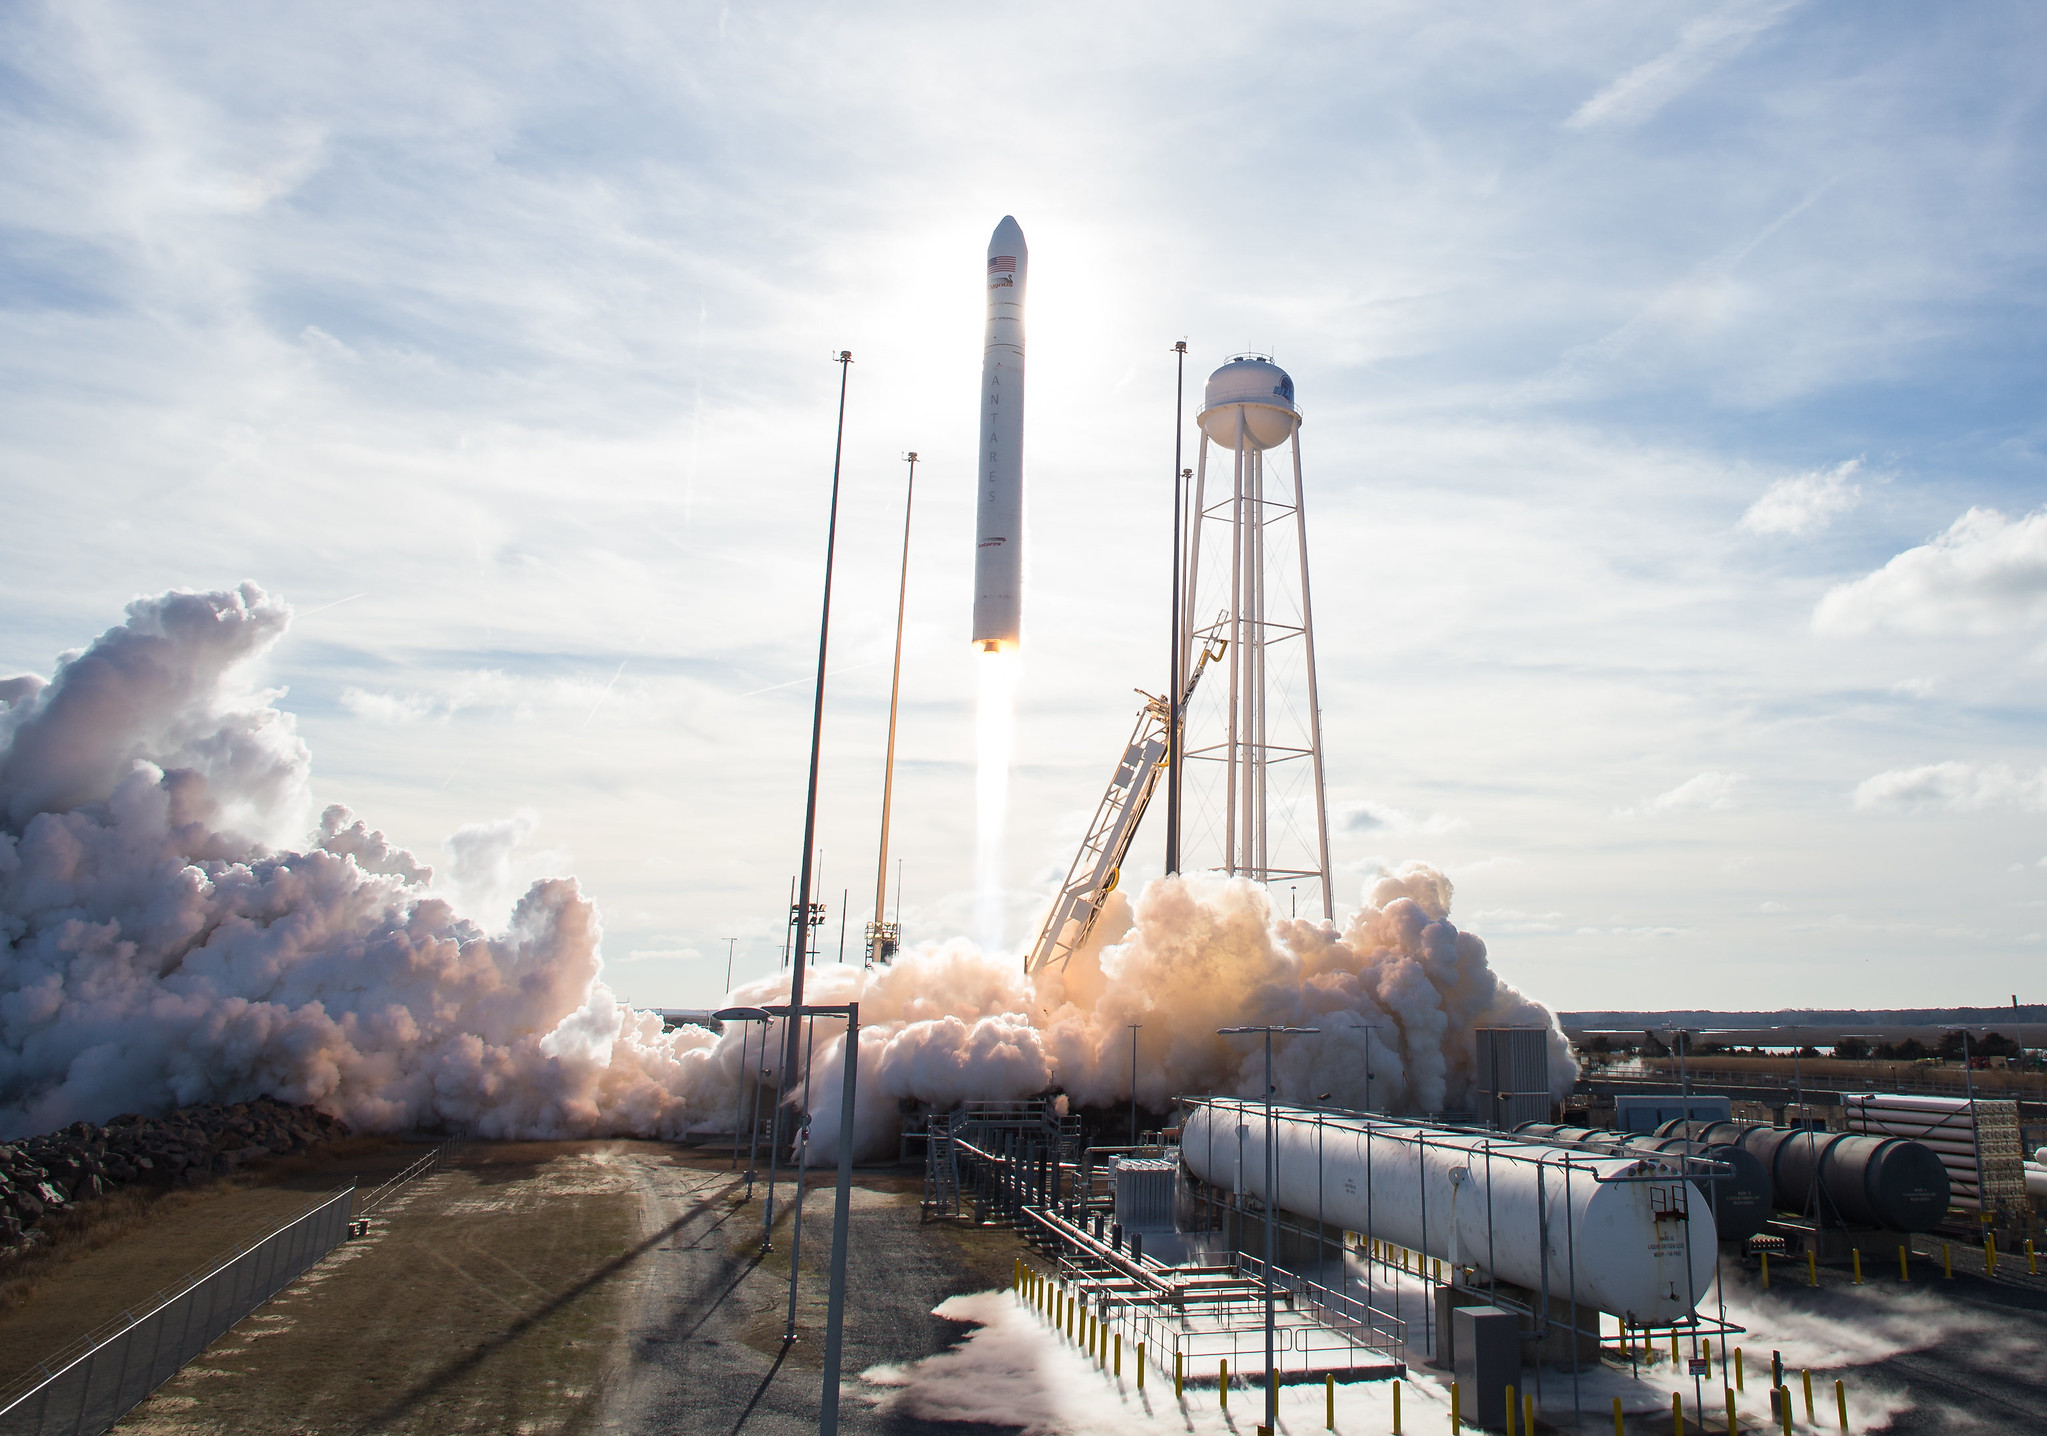 The Northrop Grumman Antares rocket, with Cygnus resupply spacecraft onboard, is seen launching from Pad-0A at NASA's Wallops